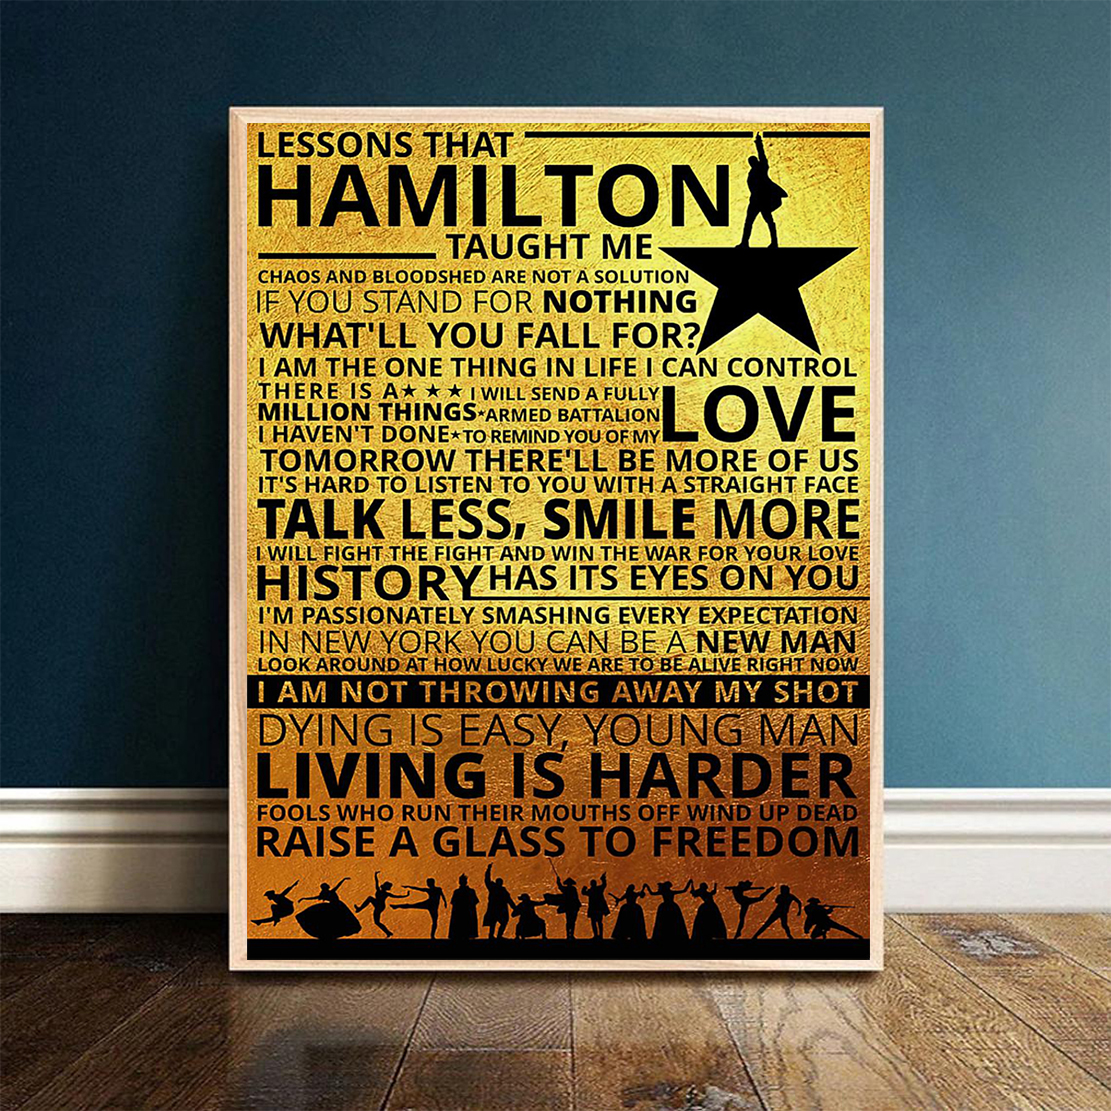 Poster lessons hamilton taught me – Teasearch3d